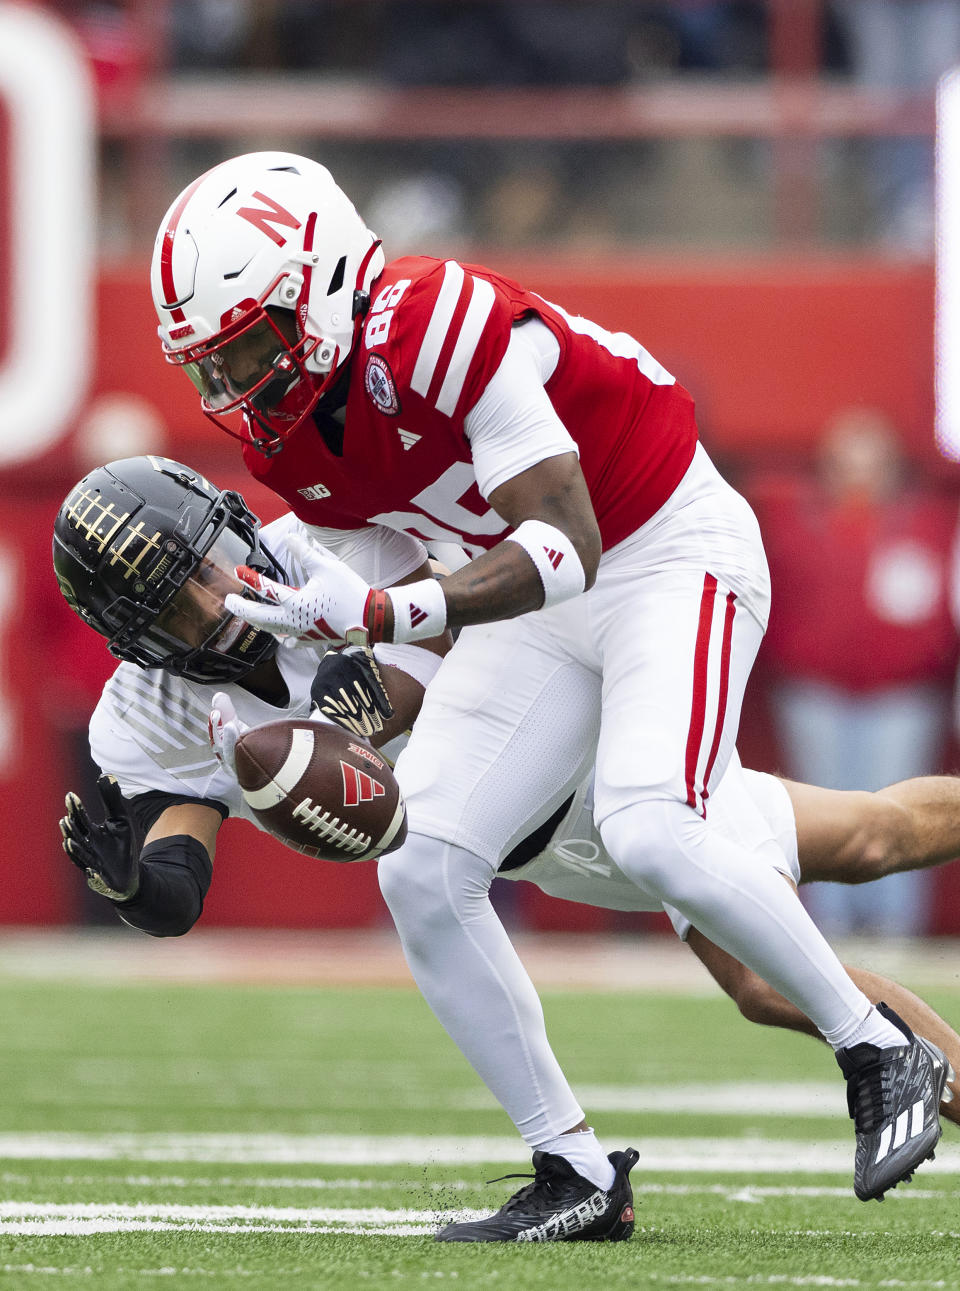 Purdue's Cam Allen, left, breaks up a pass intended for Nebraska's Jaidyn Doss, right, during the first half of an NCAA college football game Saturday, Oct. 28, 2023, in Lincoln, Neb. (AP Photo/Rebecca S. Gratz)